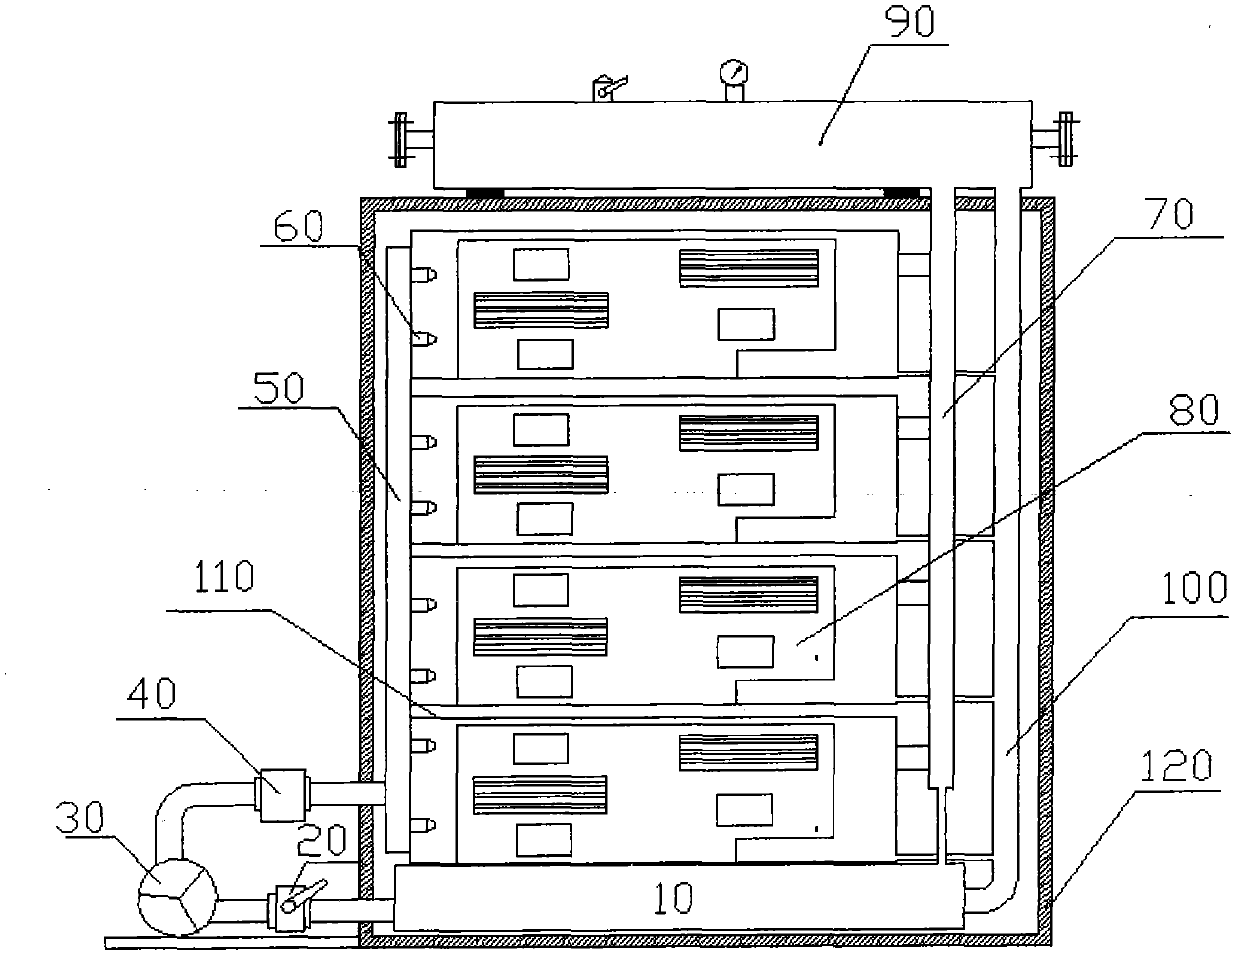 Spray-type evaporative cooling and circulating system of heating device